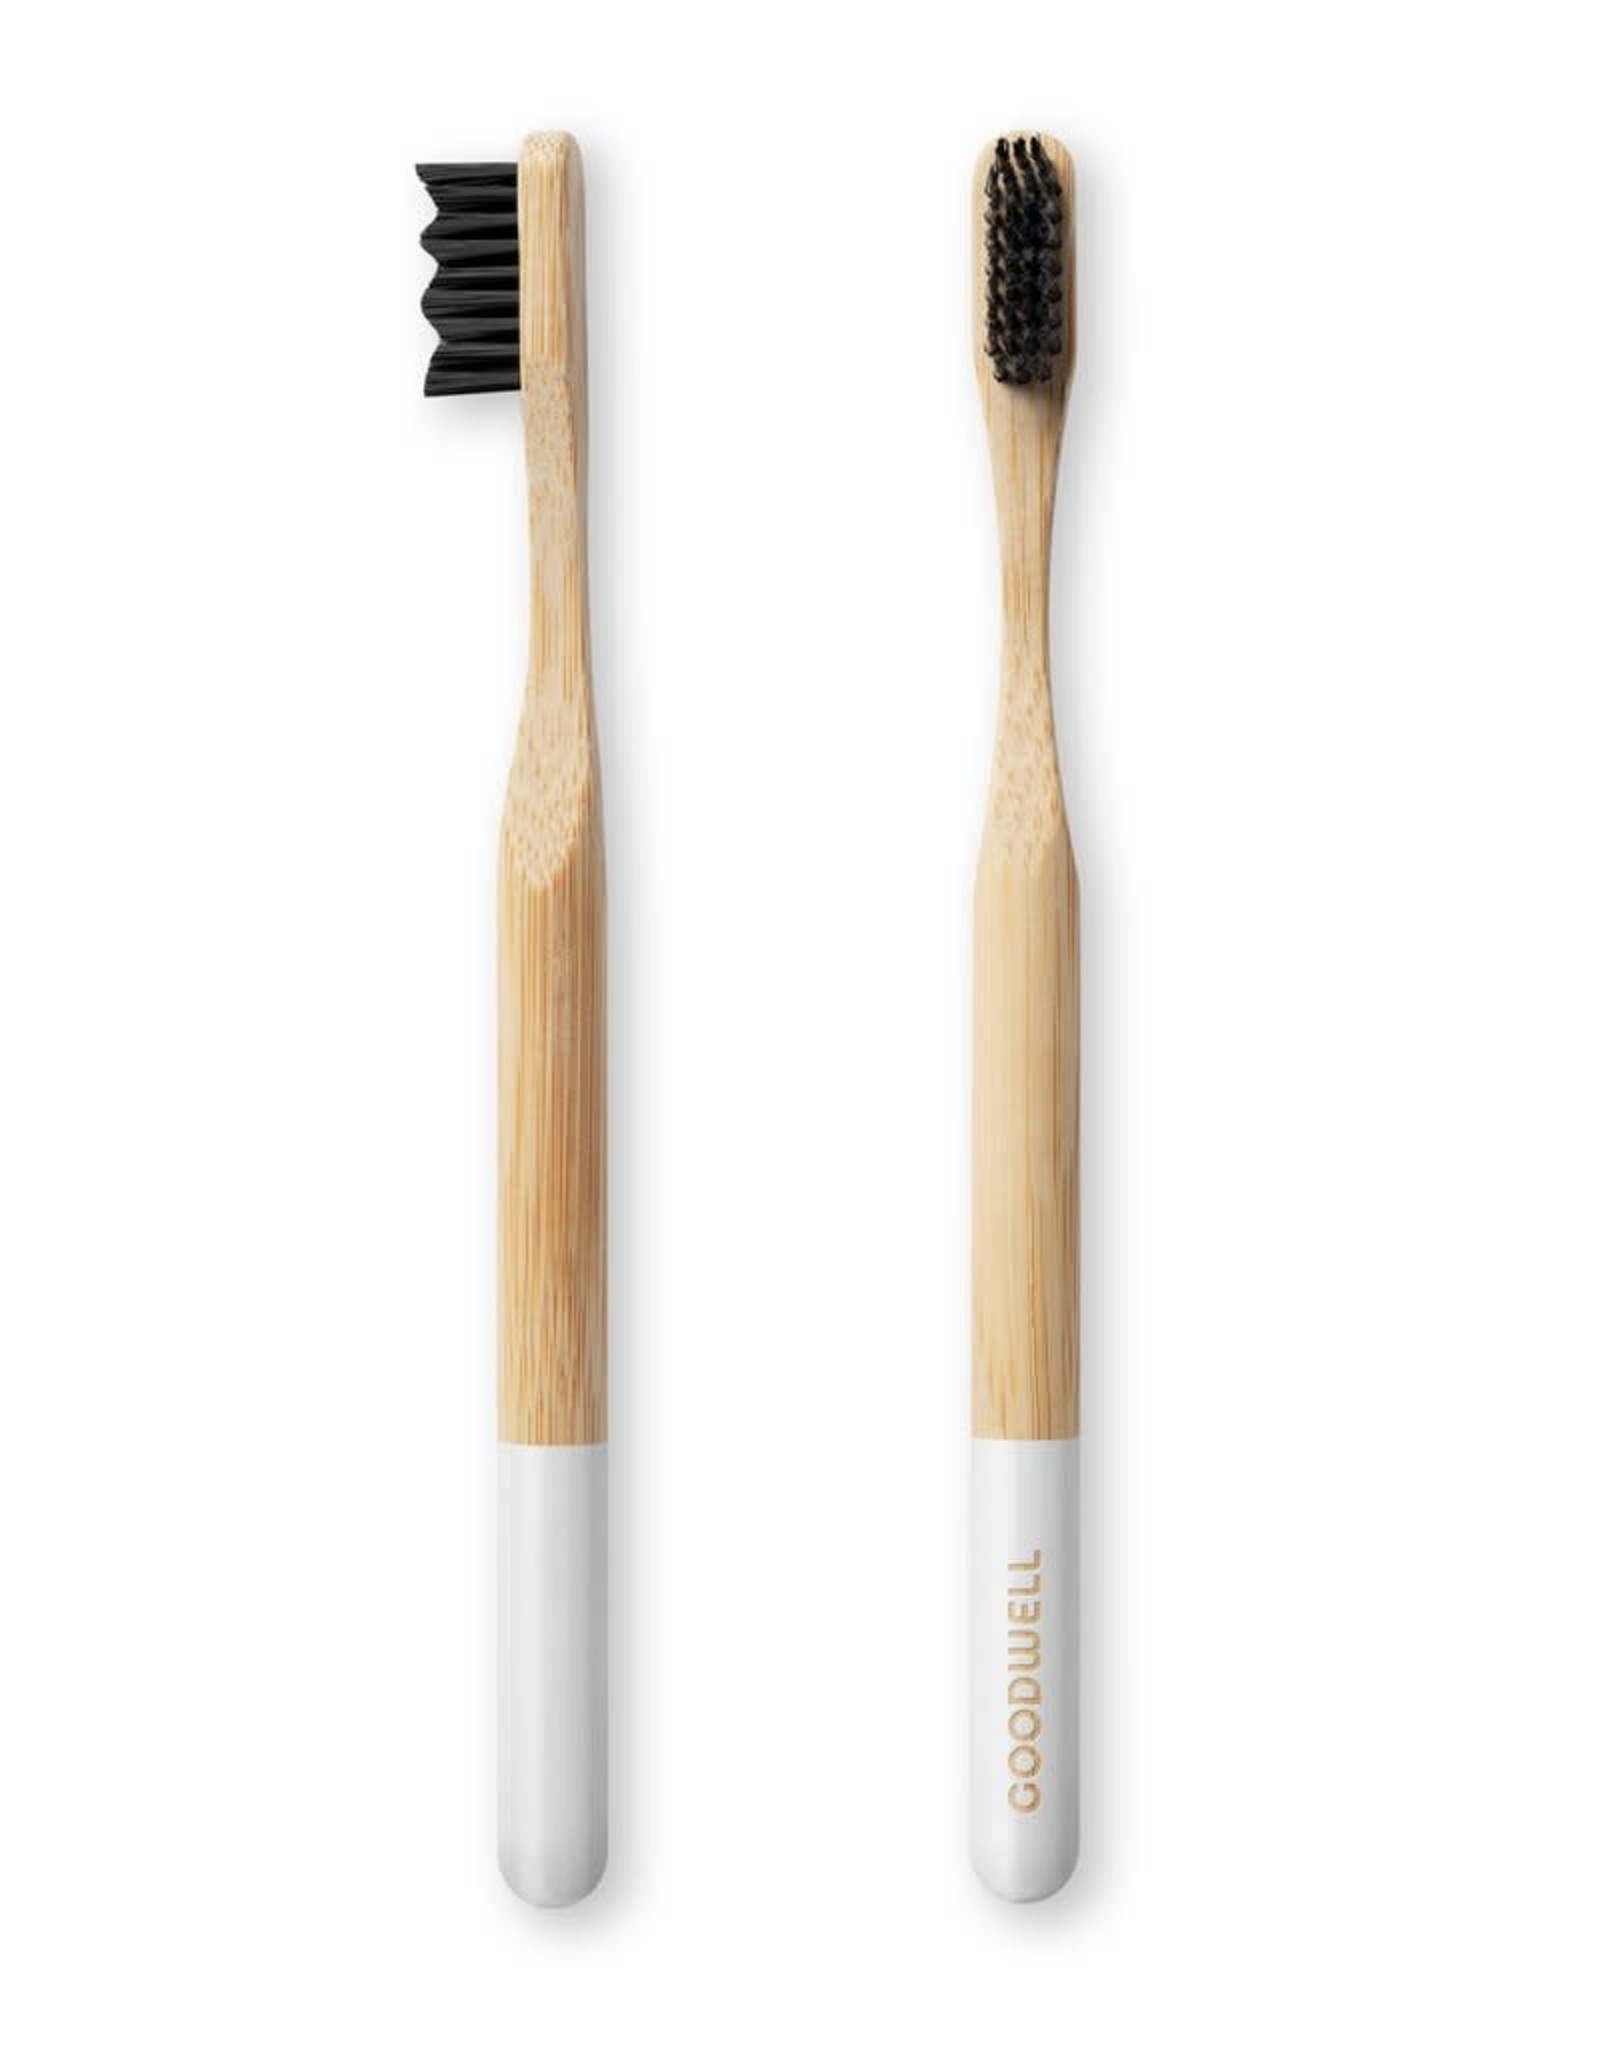 Goodwell Bamboo Toothbrush